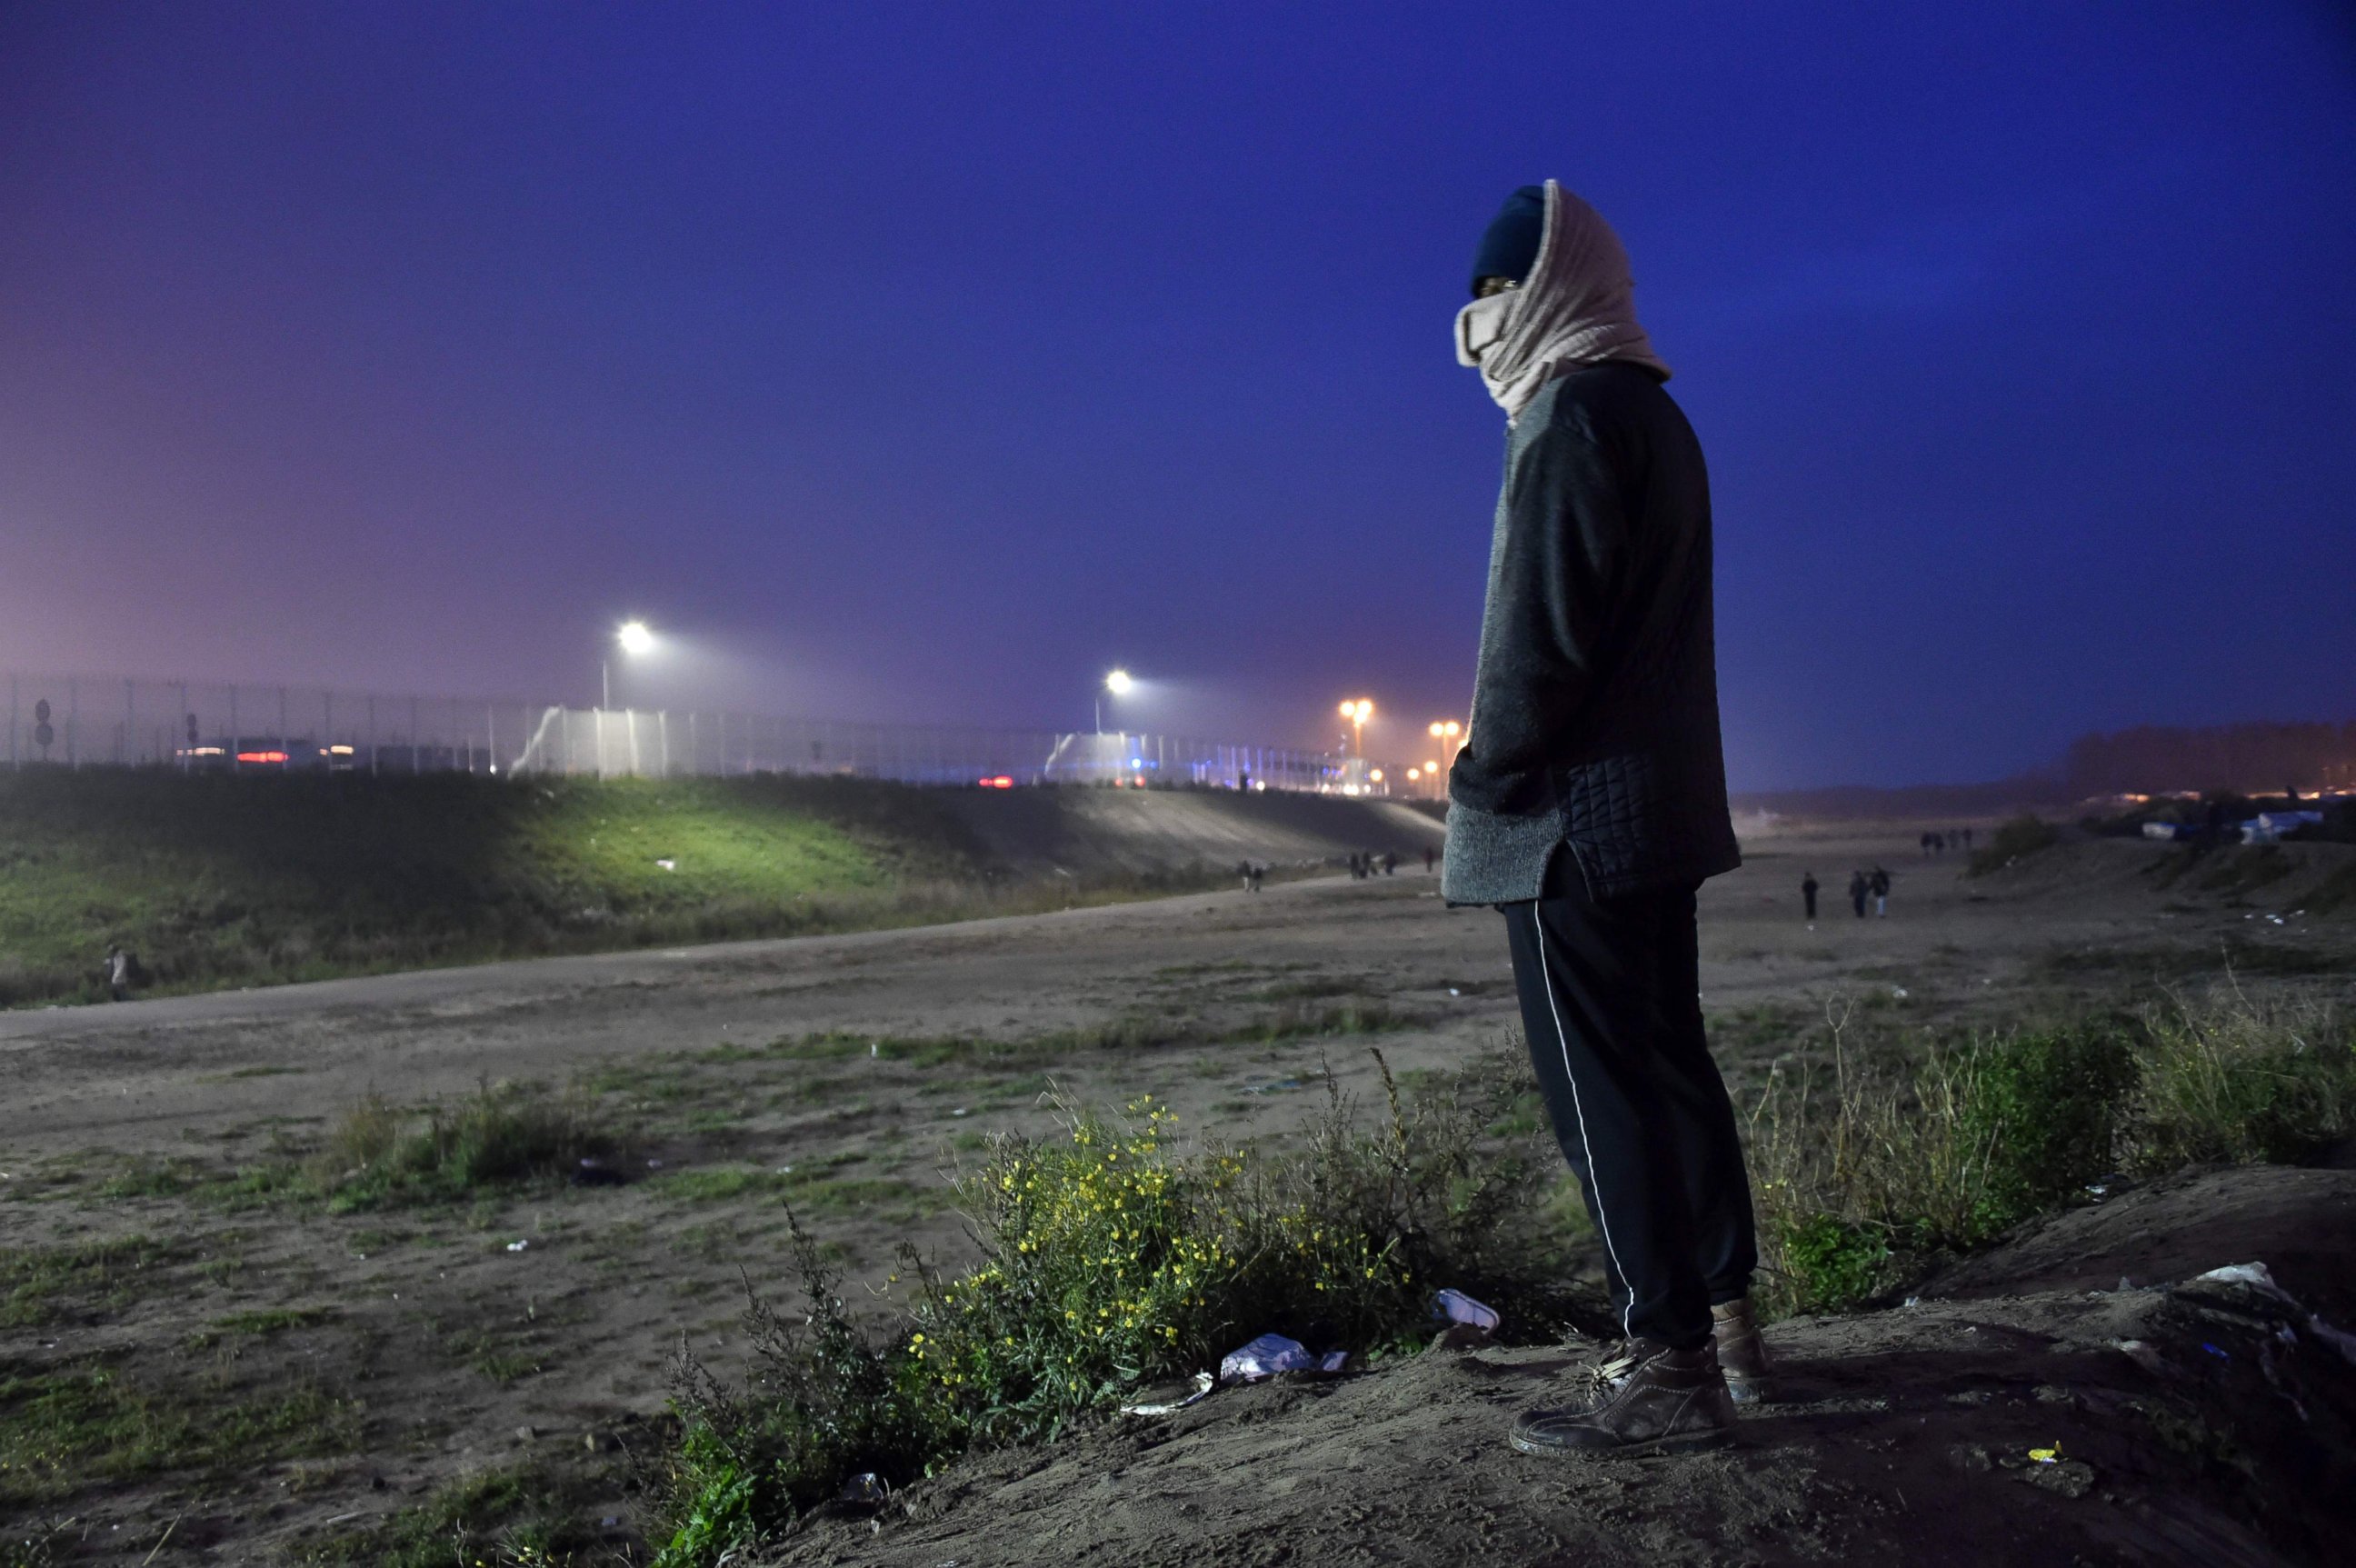 PHOTO: A migrant at the "Jungle" migrant camp in Calais, northern France, Oct. 24, 2016, as a major three-day operation is planned to clear the camp of its estimated 6,000-8,000 occupants.